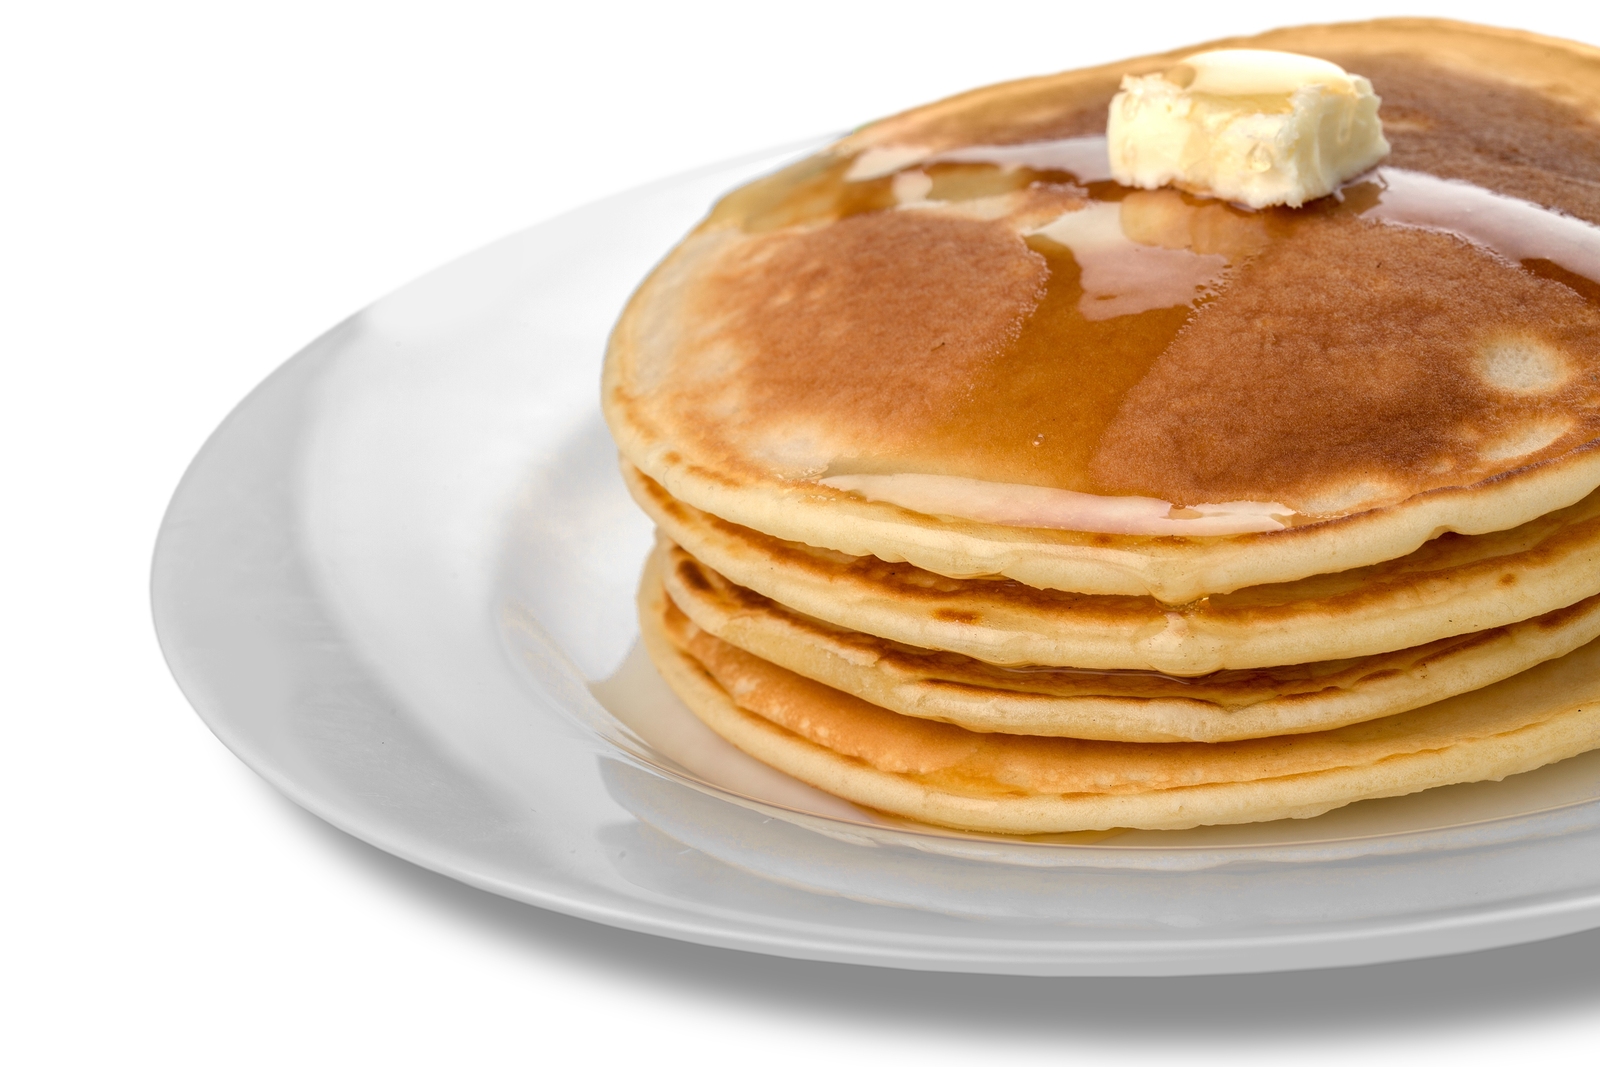 National Pancake Day March 8 means free short stack at IHOP